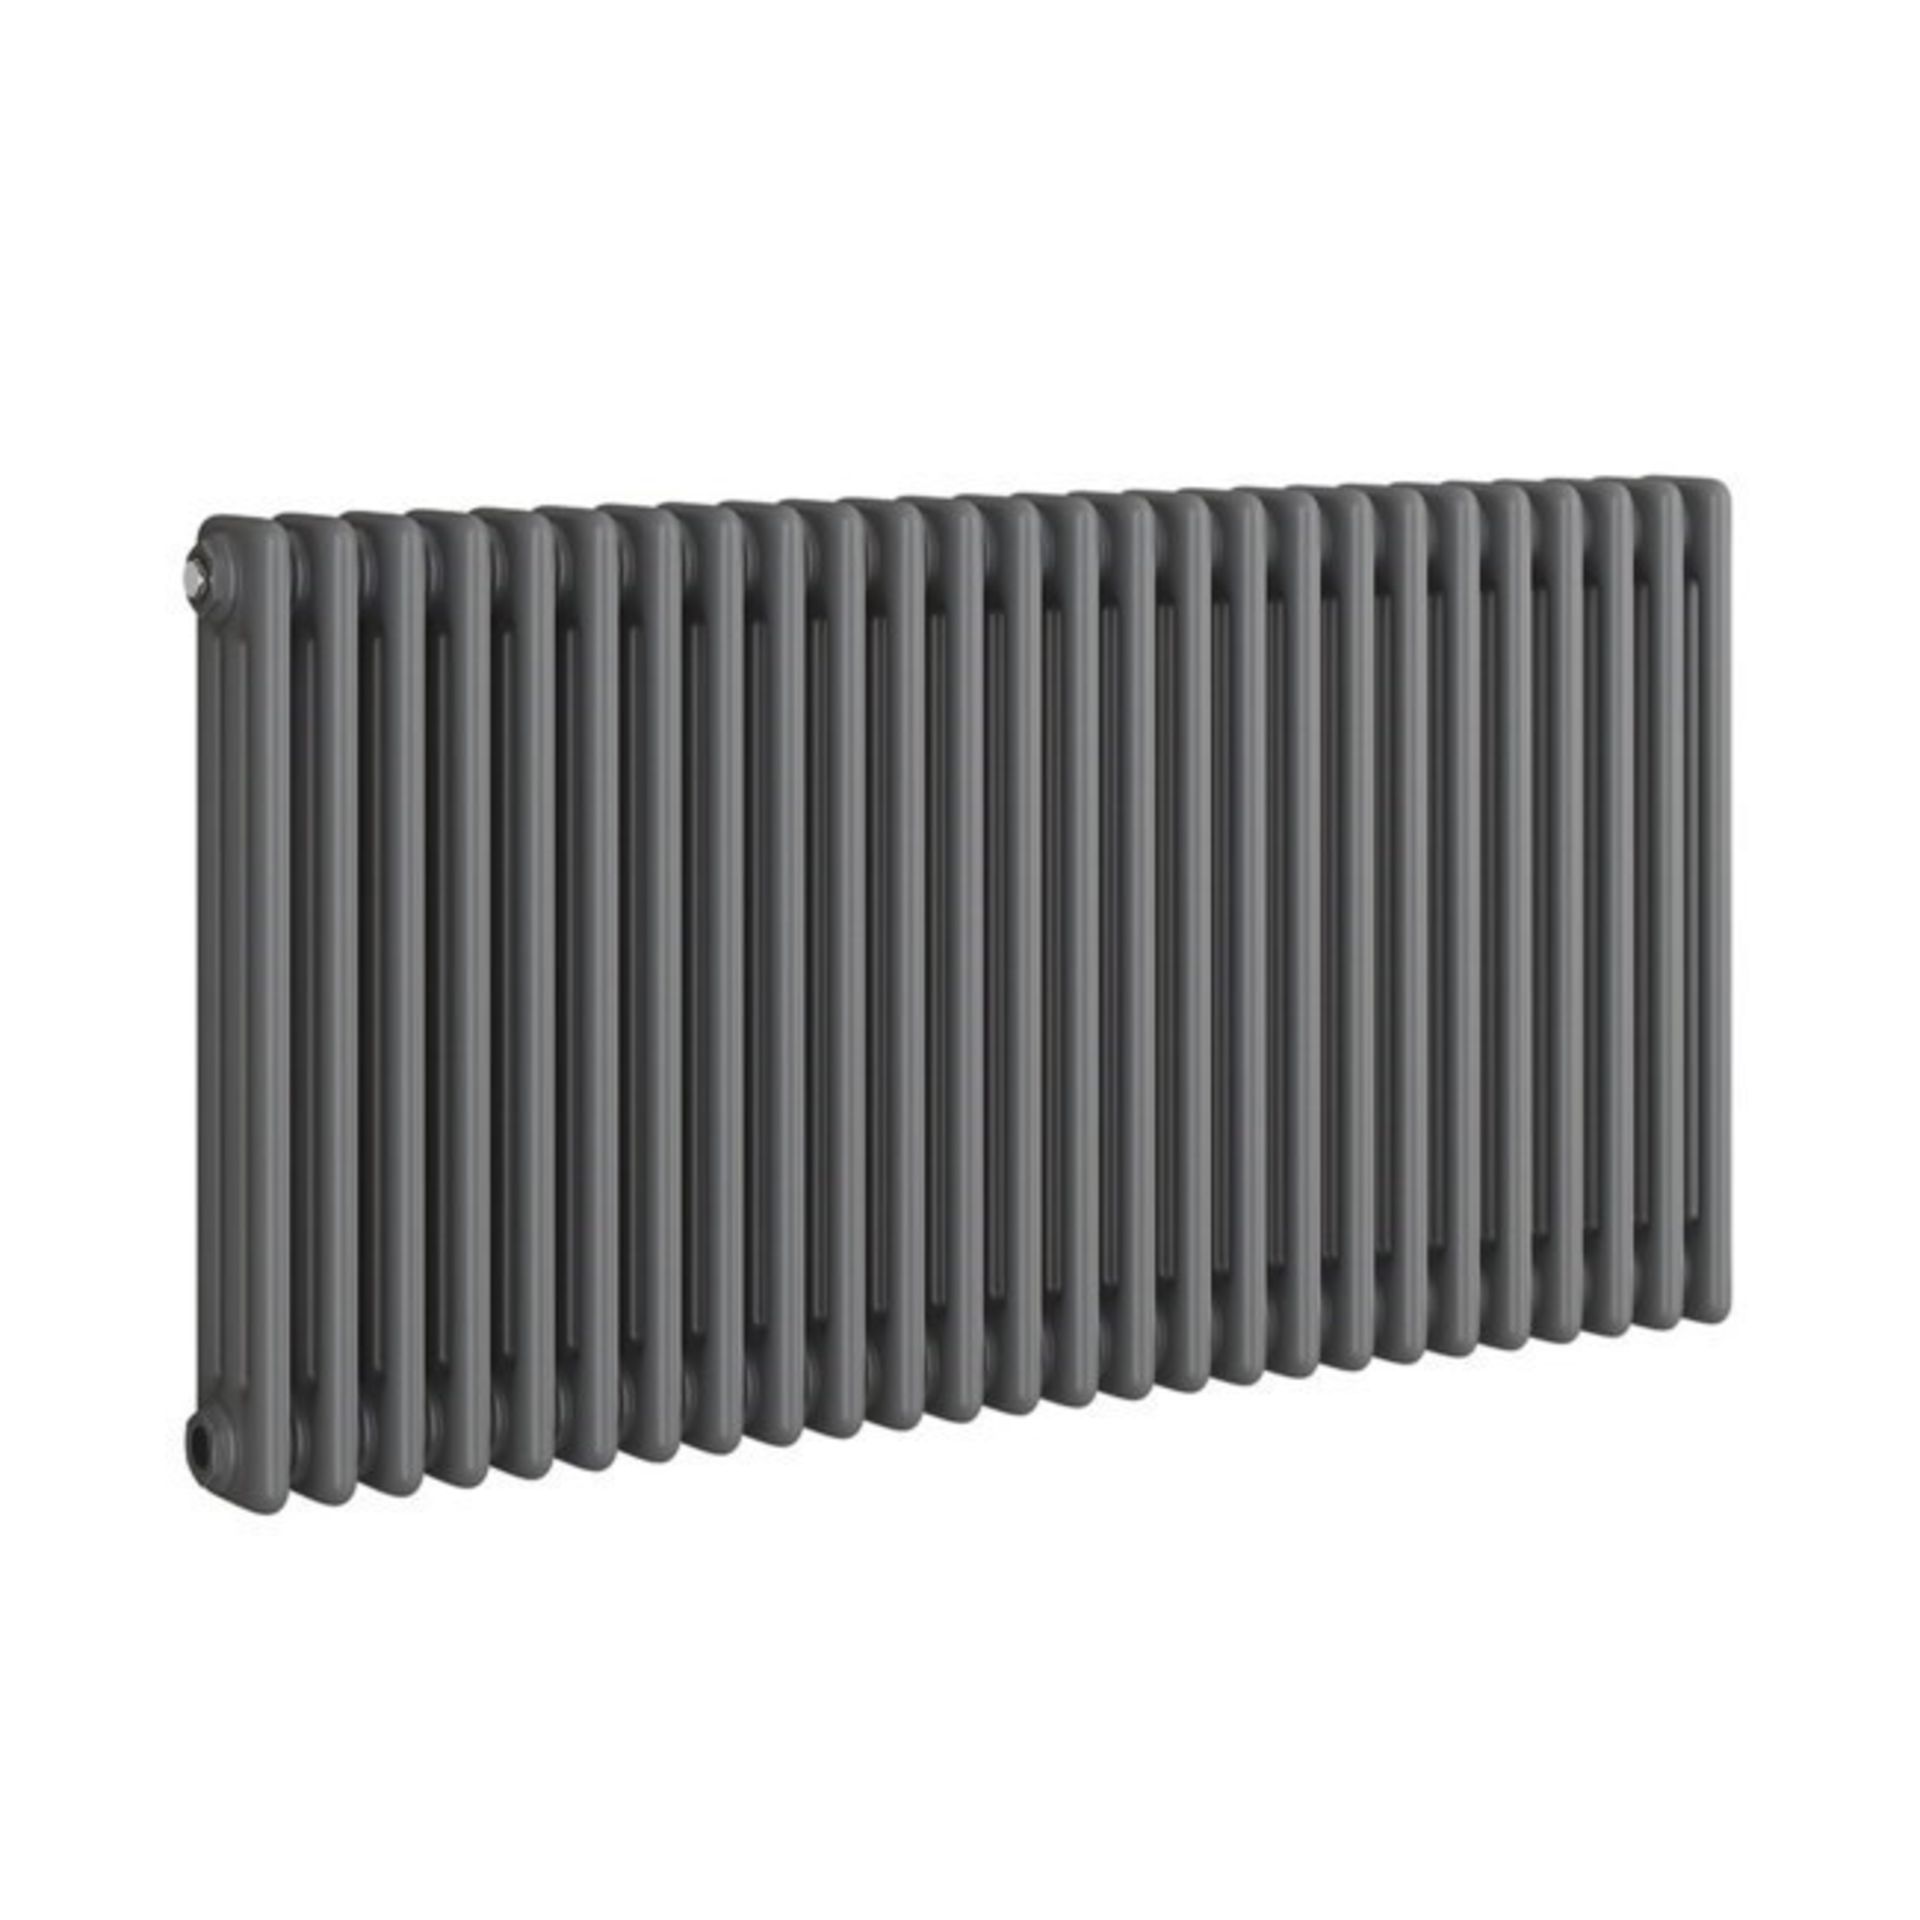 New 600x828mm Anthracite Double Panel Horizontal Colosseum Traditional Radiator.RCA563.RRP £542.99. - Image 2 of 3